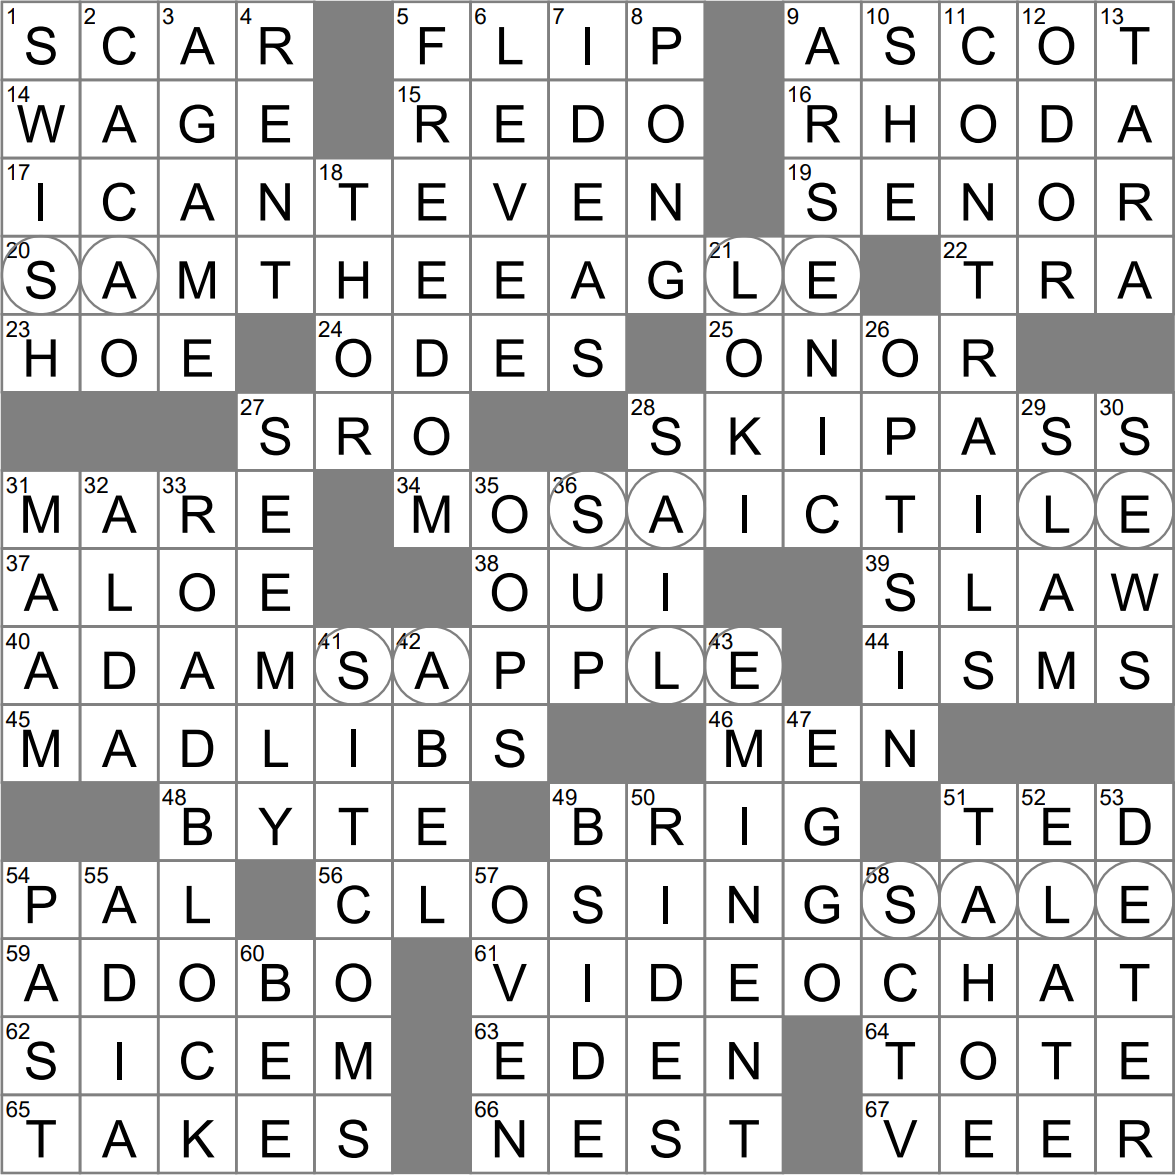 Explain Hairstyle with head shaved except for a central strip 7 using the  Crossword Dictionary at wordplayscom  Wordplayscom